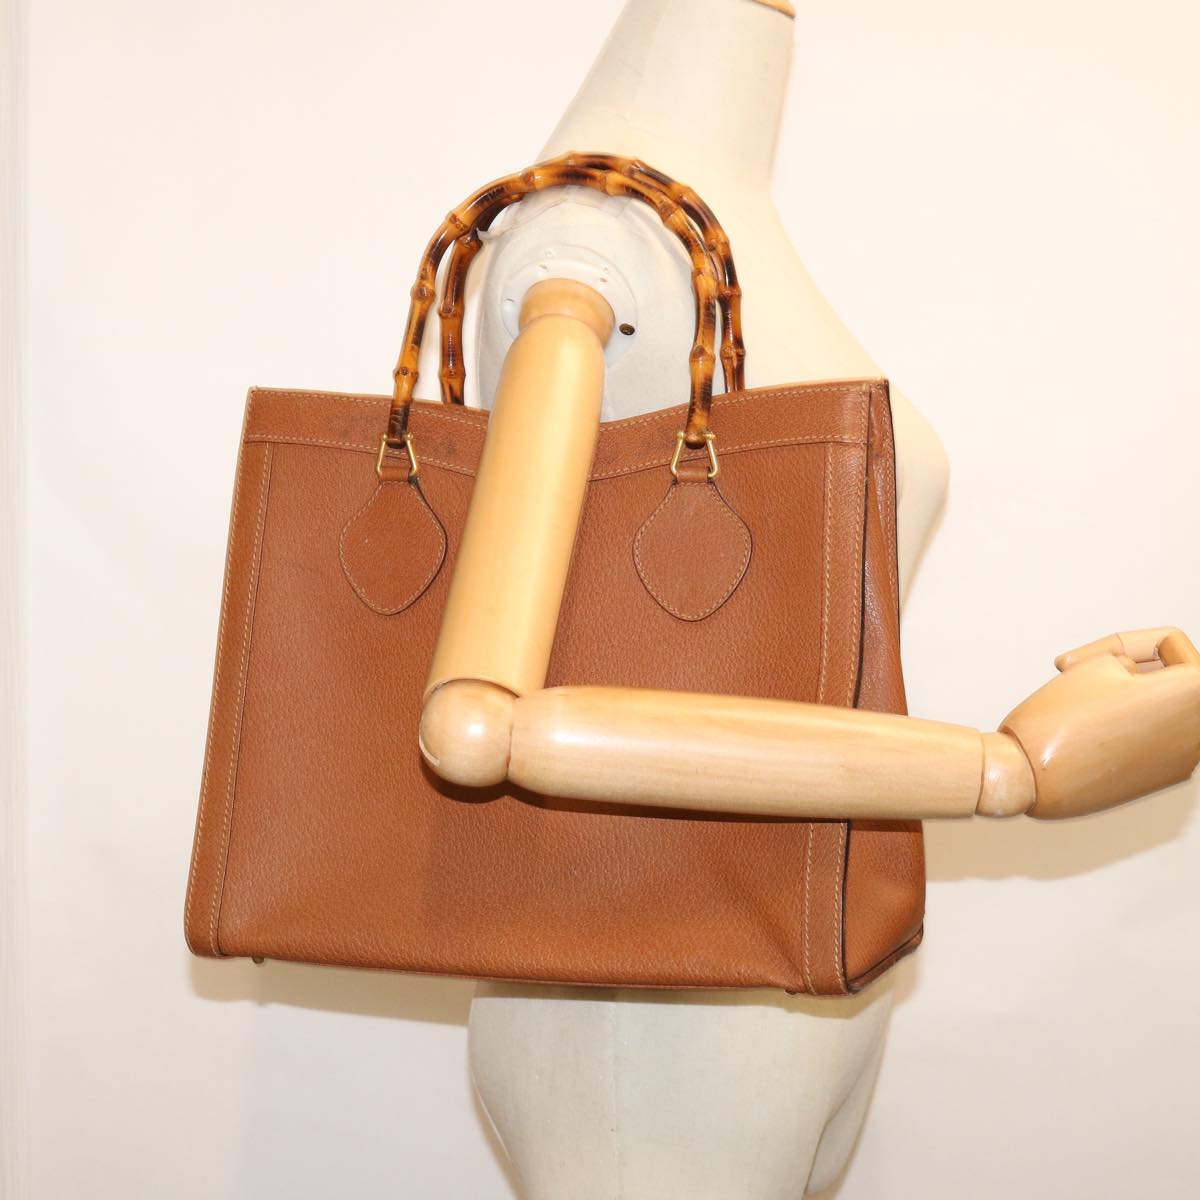 GUCCI Bamboo Tote Bag Leather Brown 002 2853 0260 0 Auth ep3720